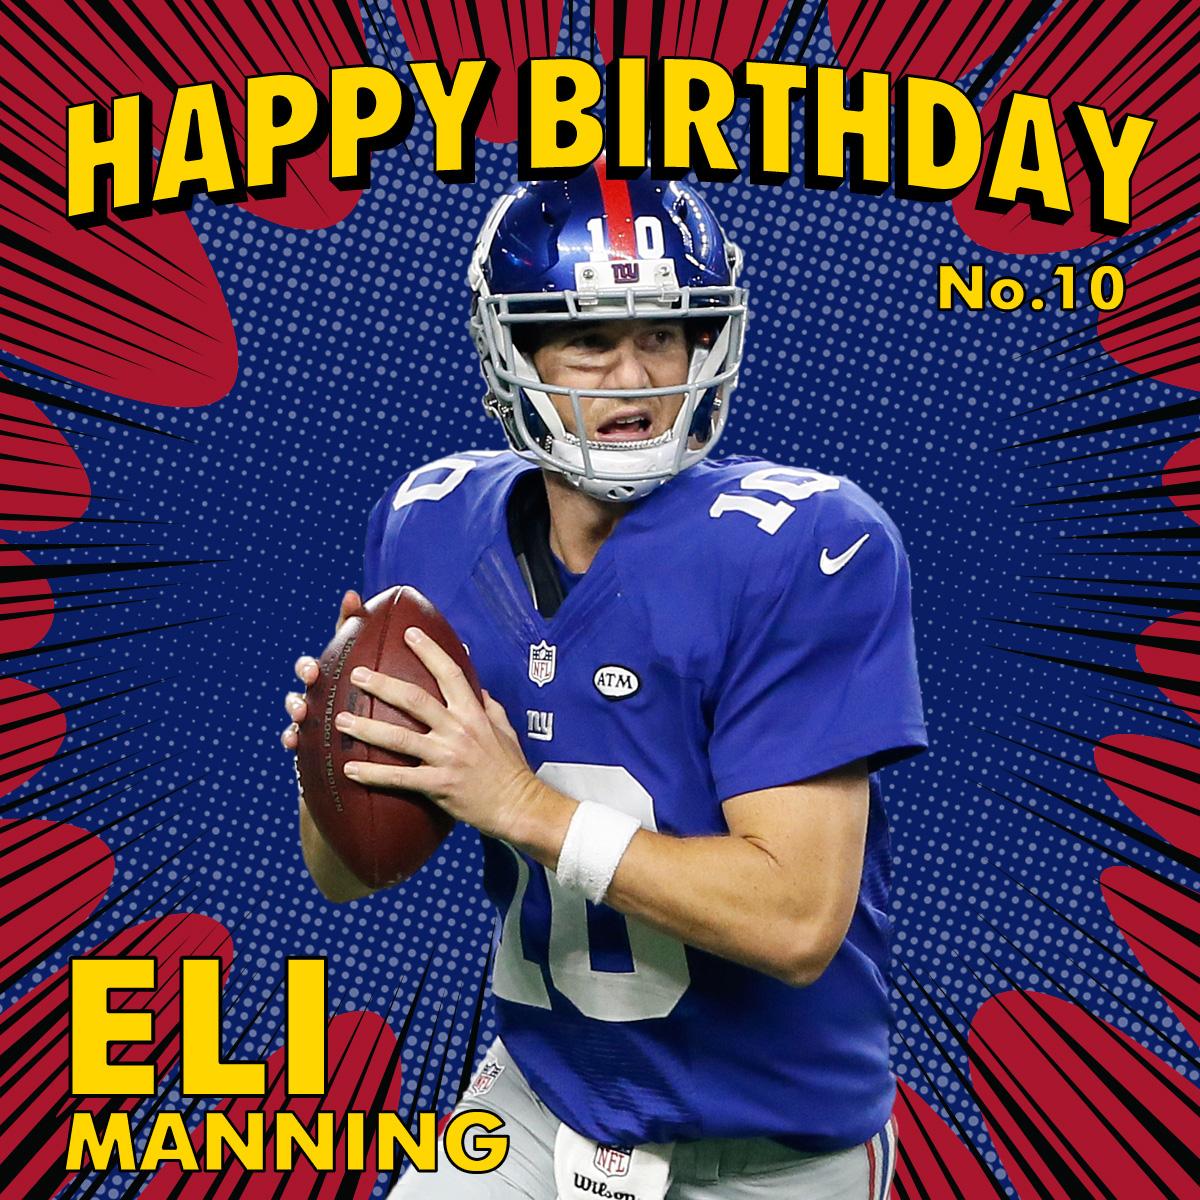 NFL on X: RT to wish two-time Super Bowl champion Eli Manning a